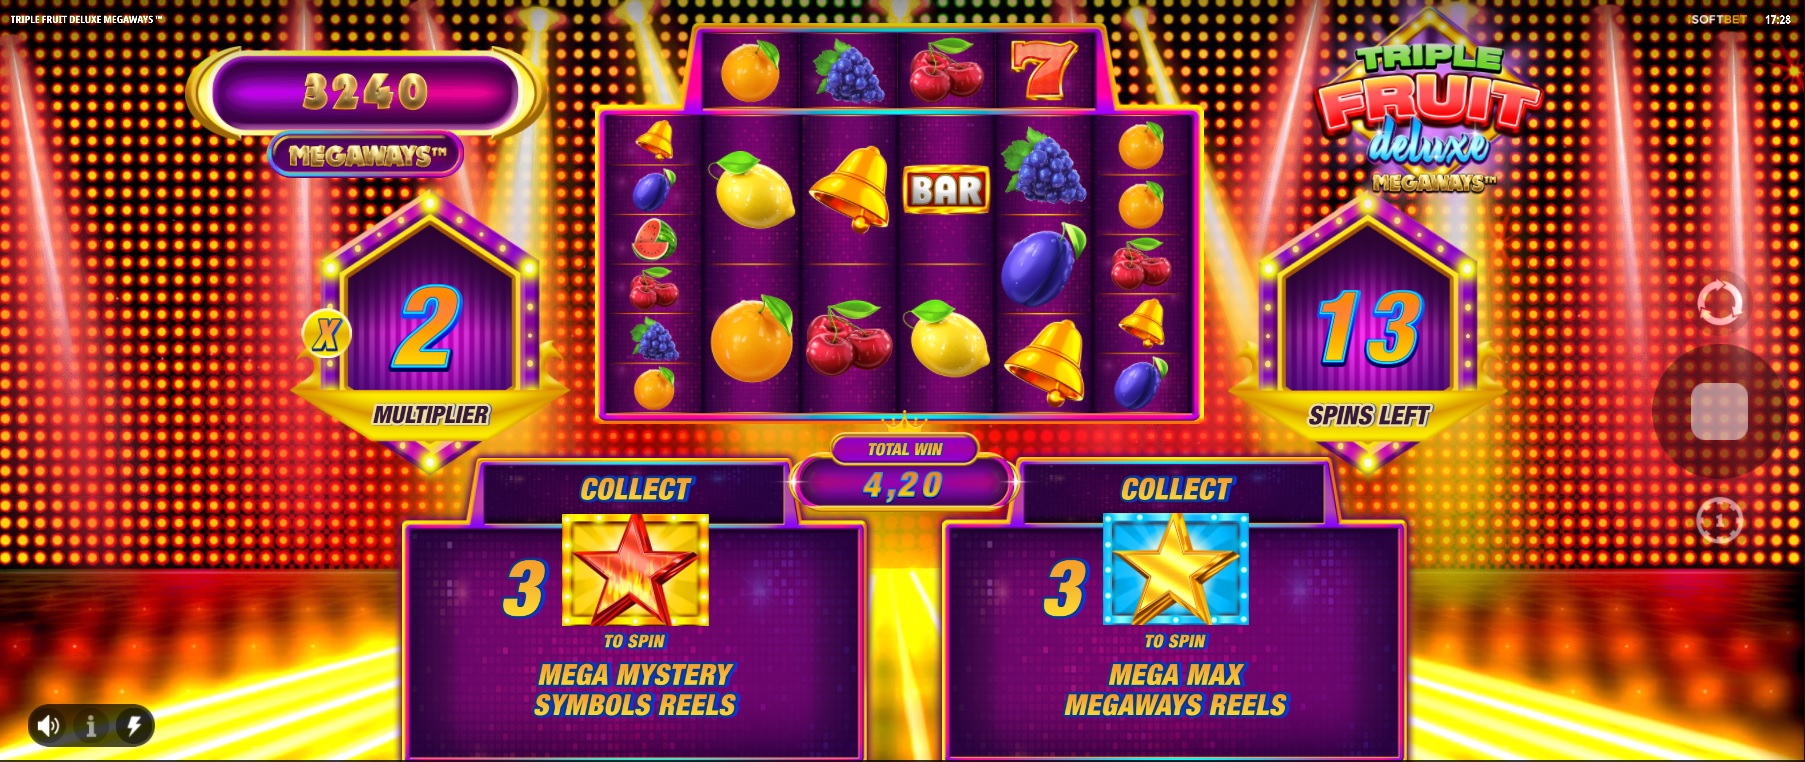 Triple Fruit Deluxe Megaways, Free spins feature